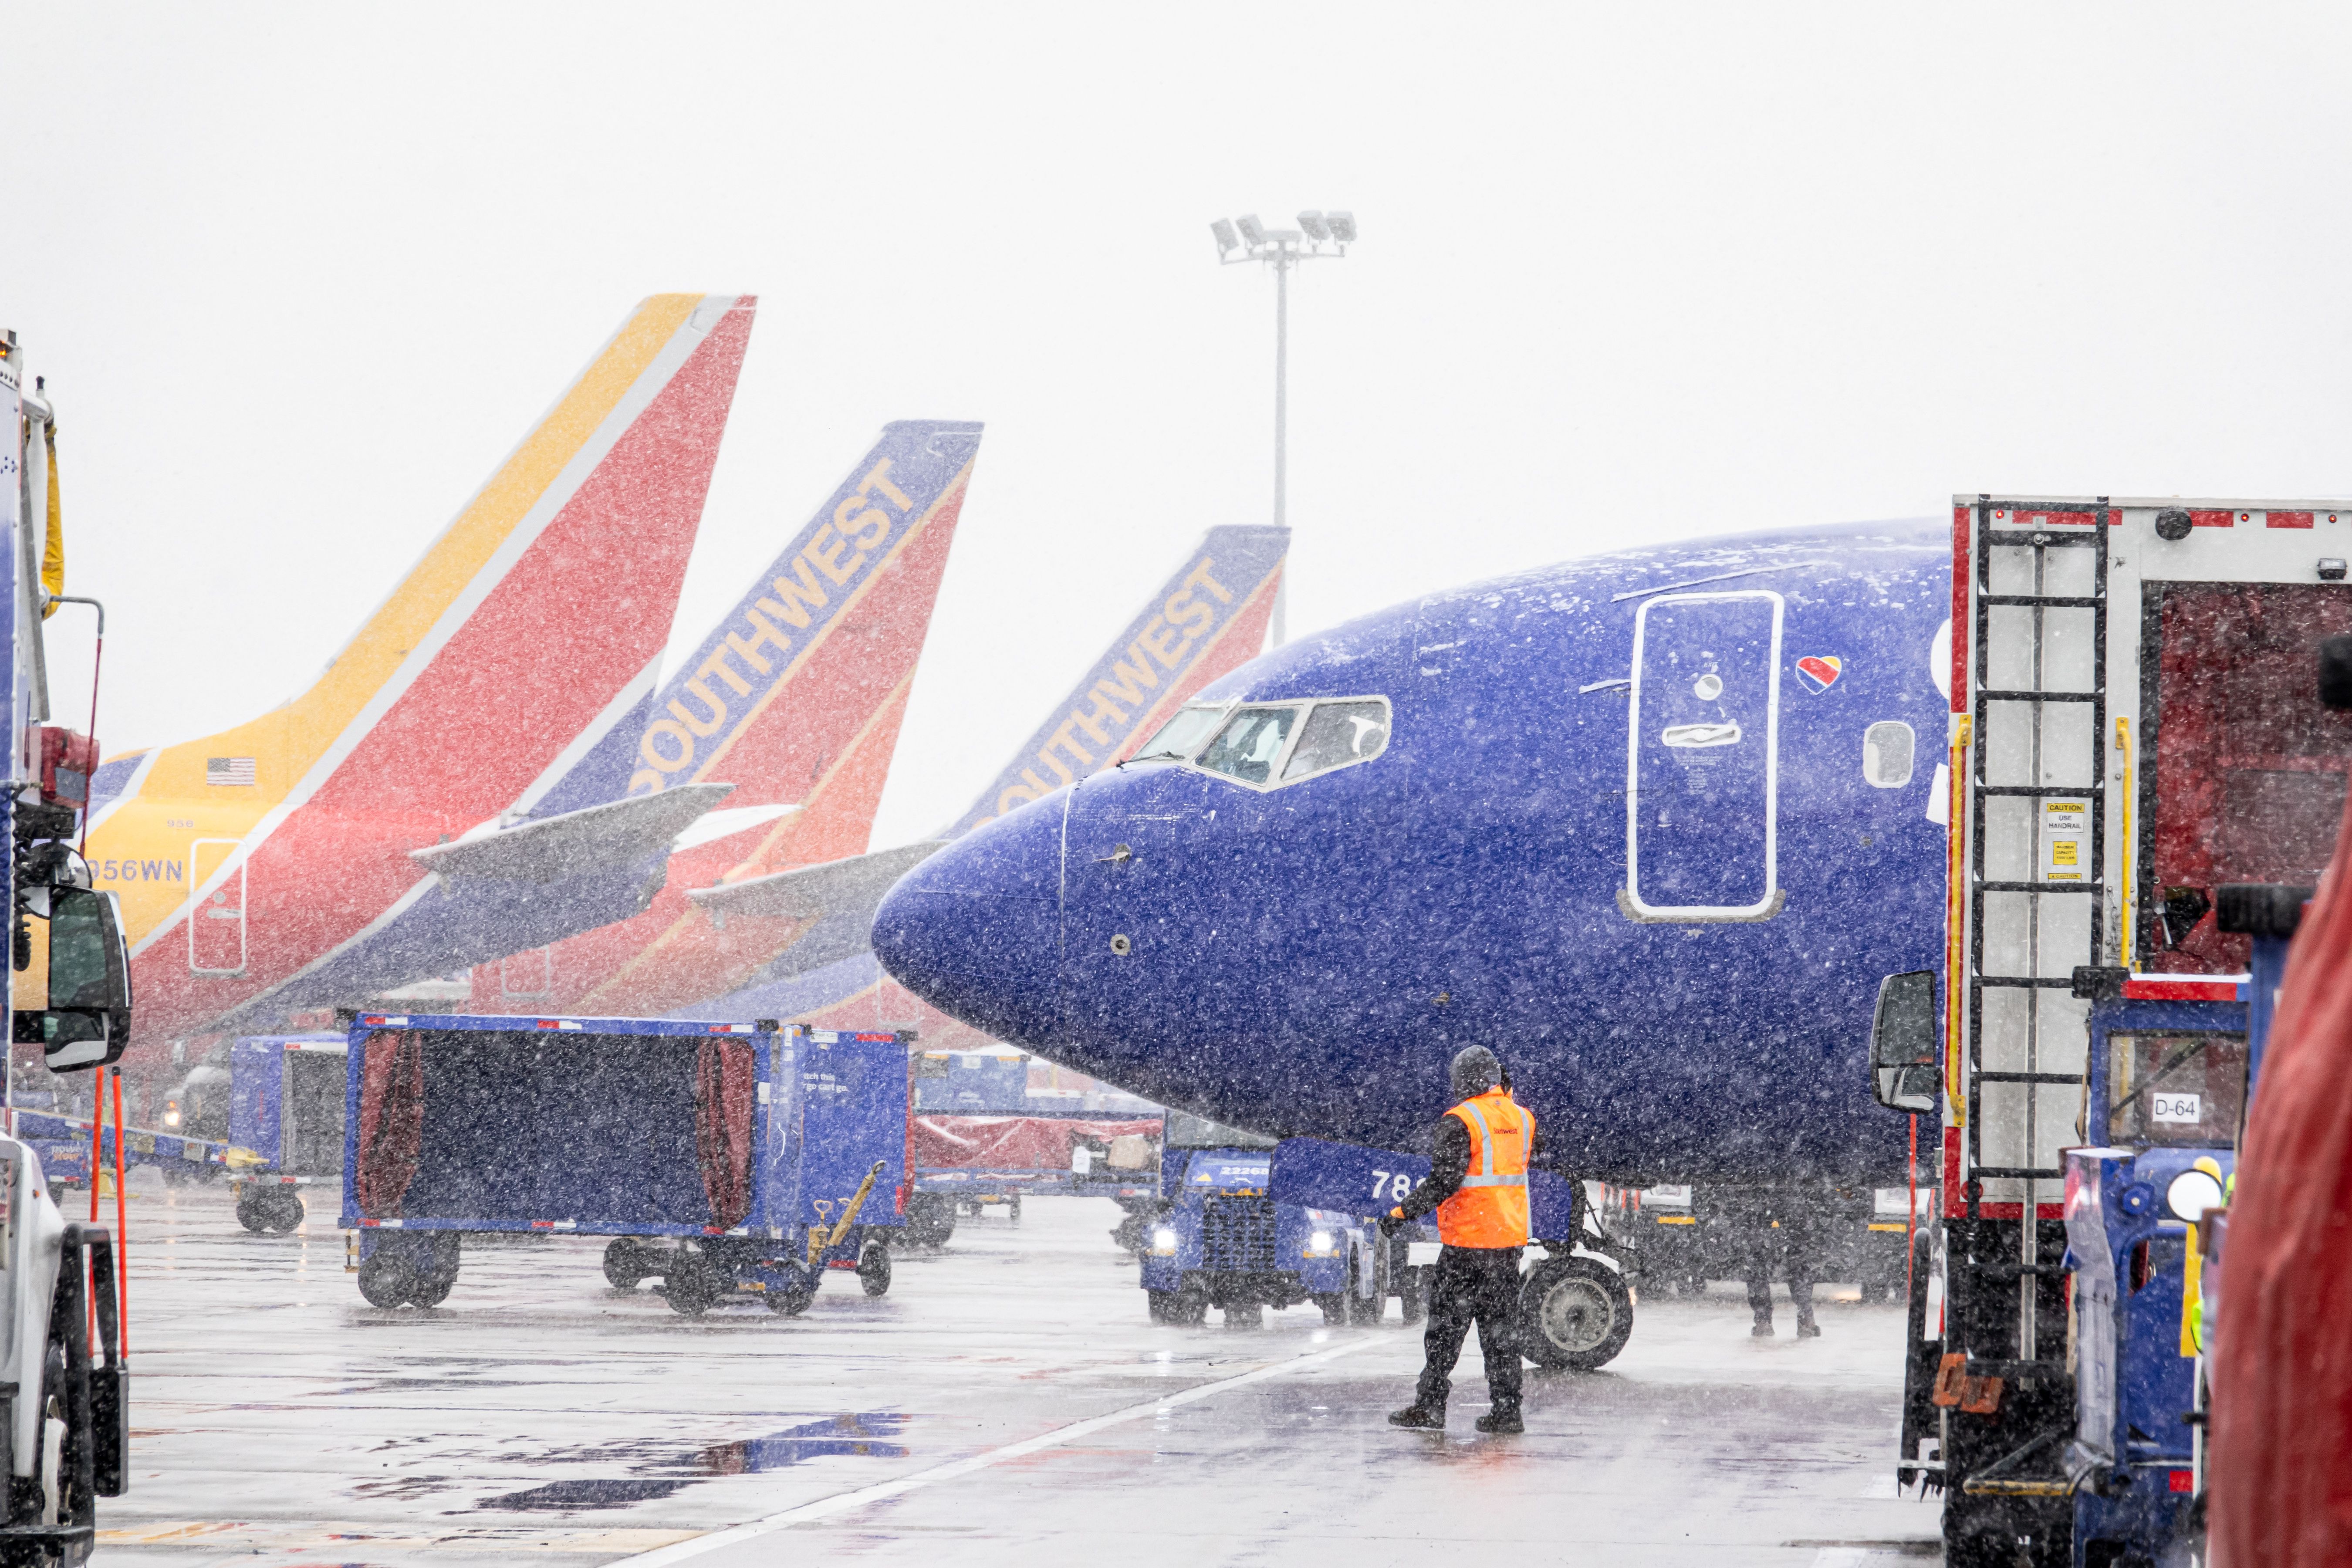 Southwest Airlines Ground Operations at Airport in Winter